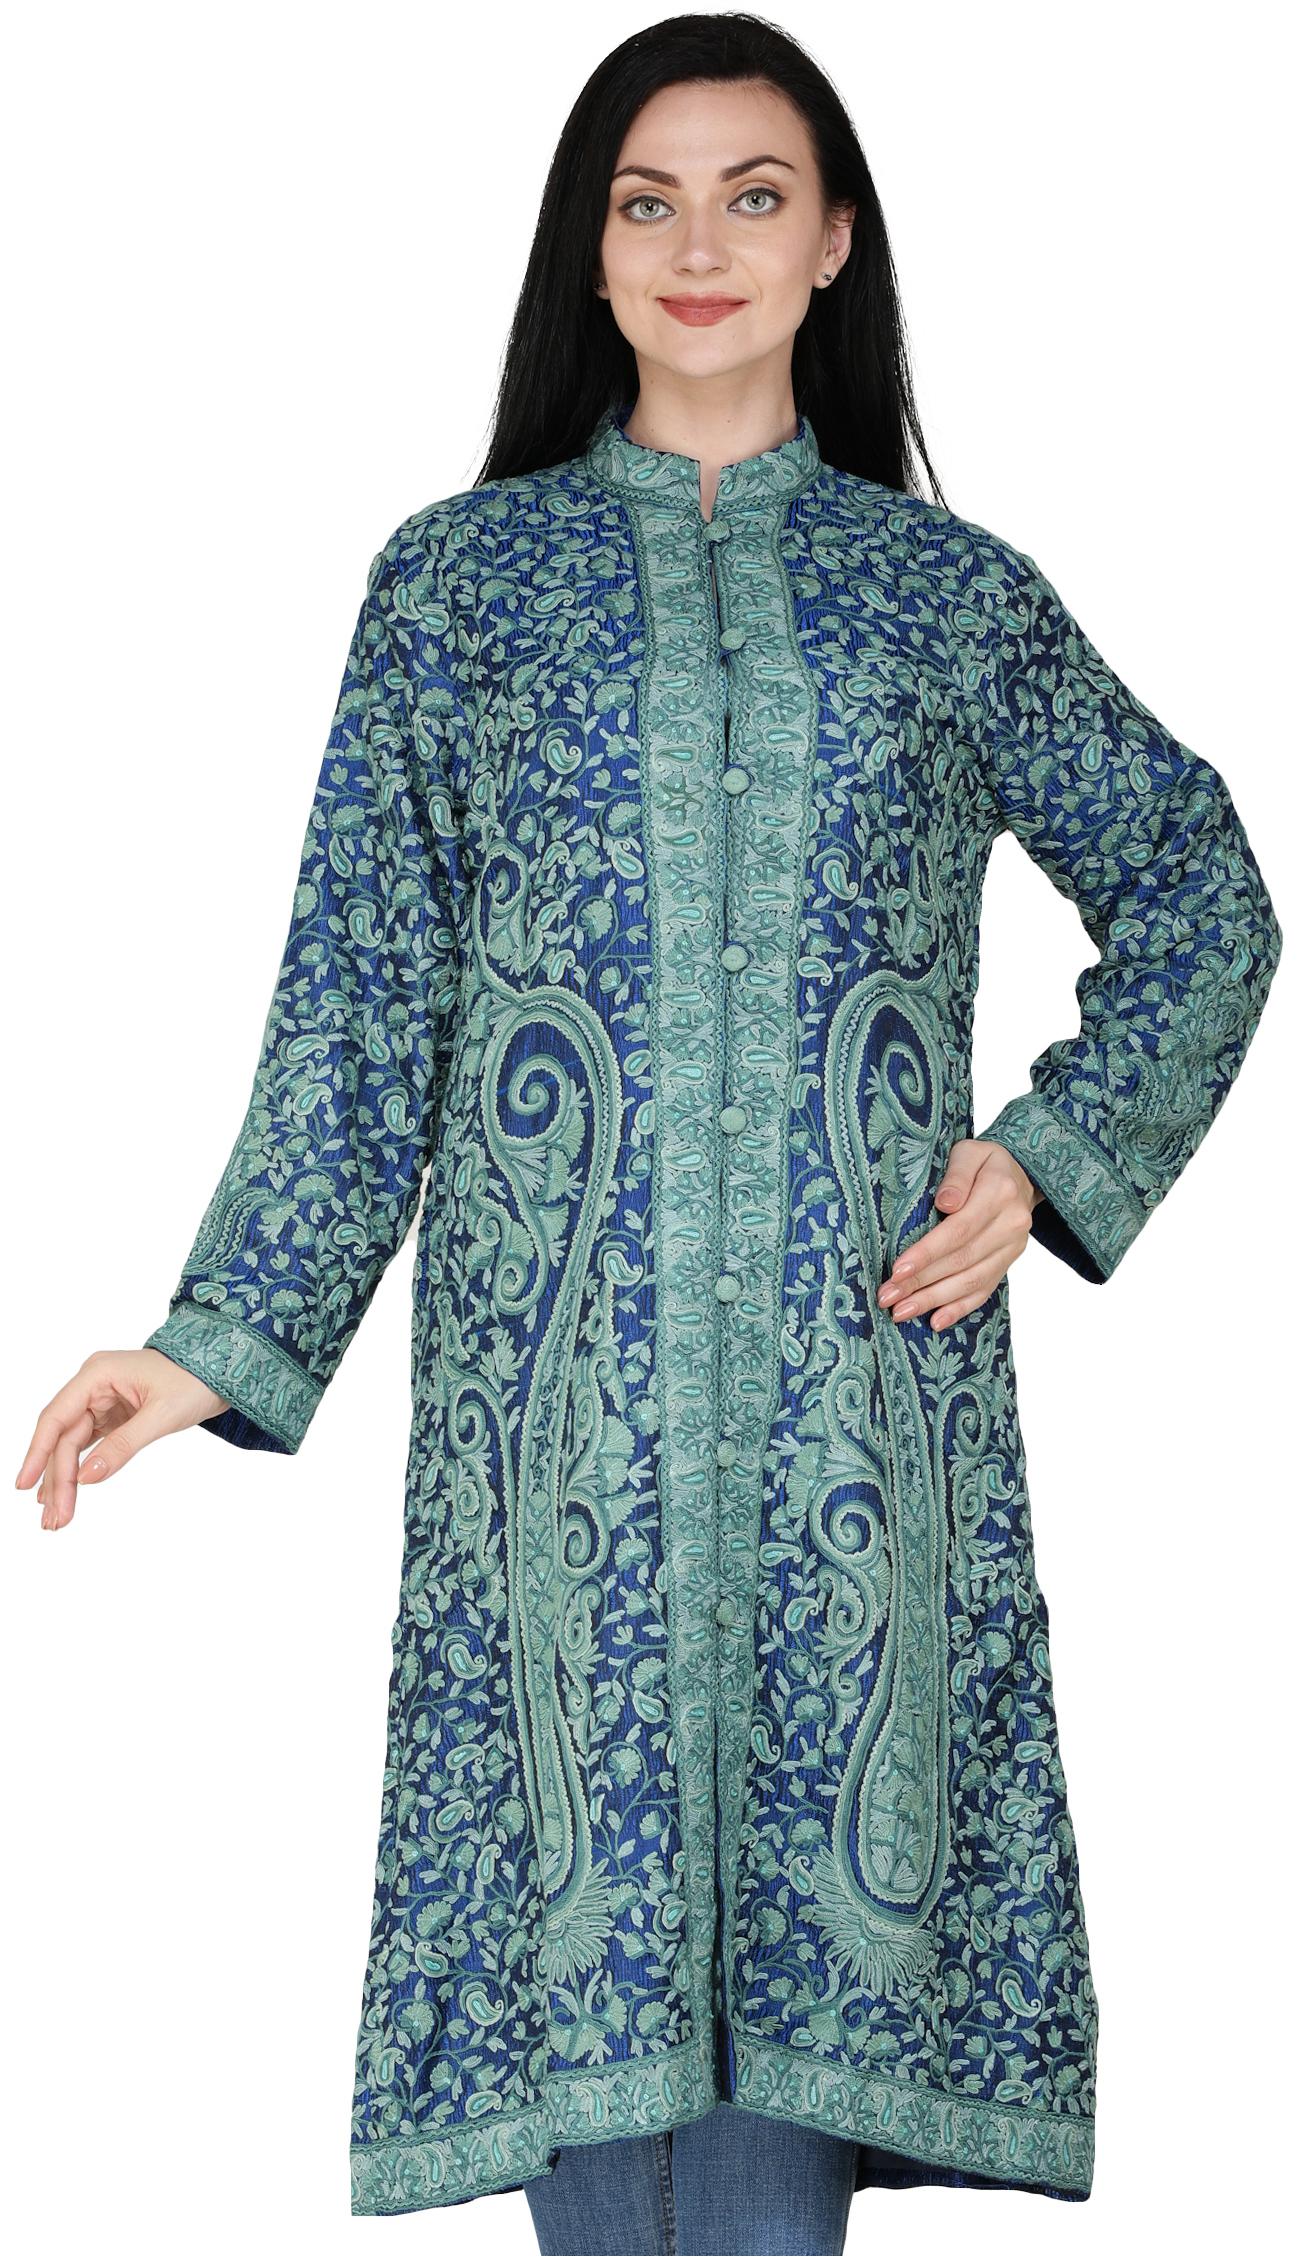 Buy Zamour Women's Kashmiri Silk Coat Jacket Crewel Hand Embroidered Chinar  Work at Amazon.in